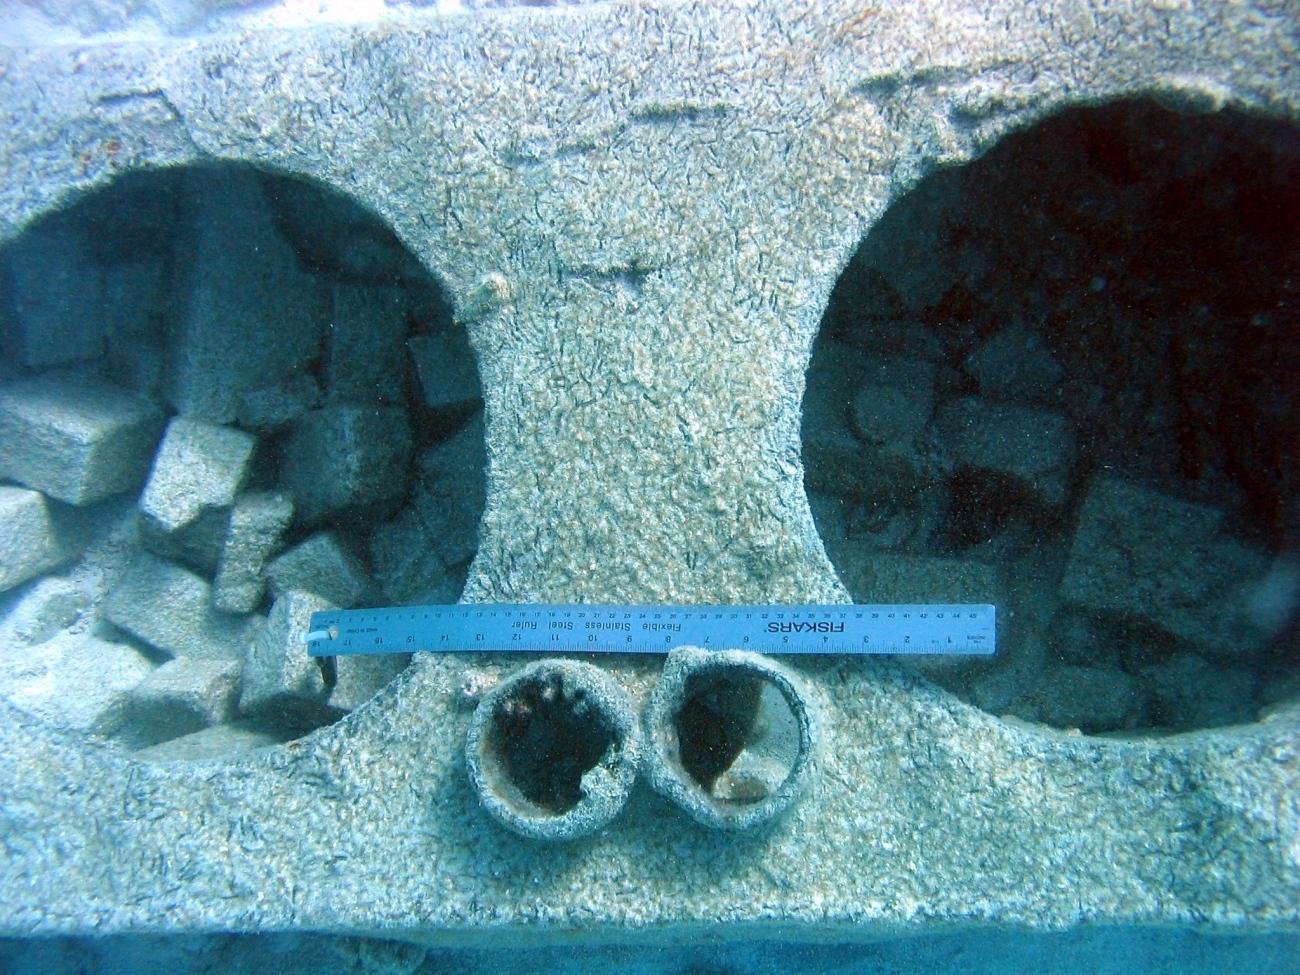 Bricks used to retain heat in cooking oven in debris field of early TwentiethCentury ship wreck on Pearl and Hermes Reef